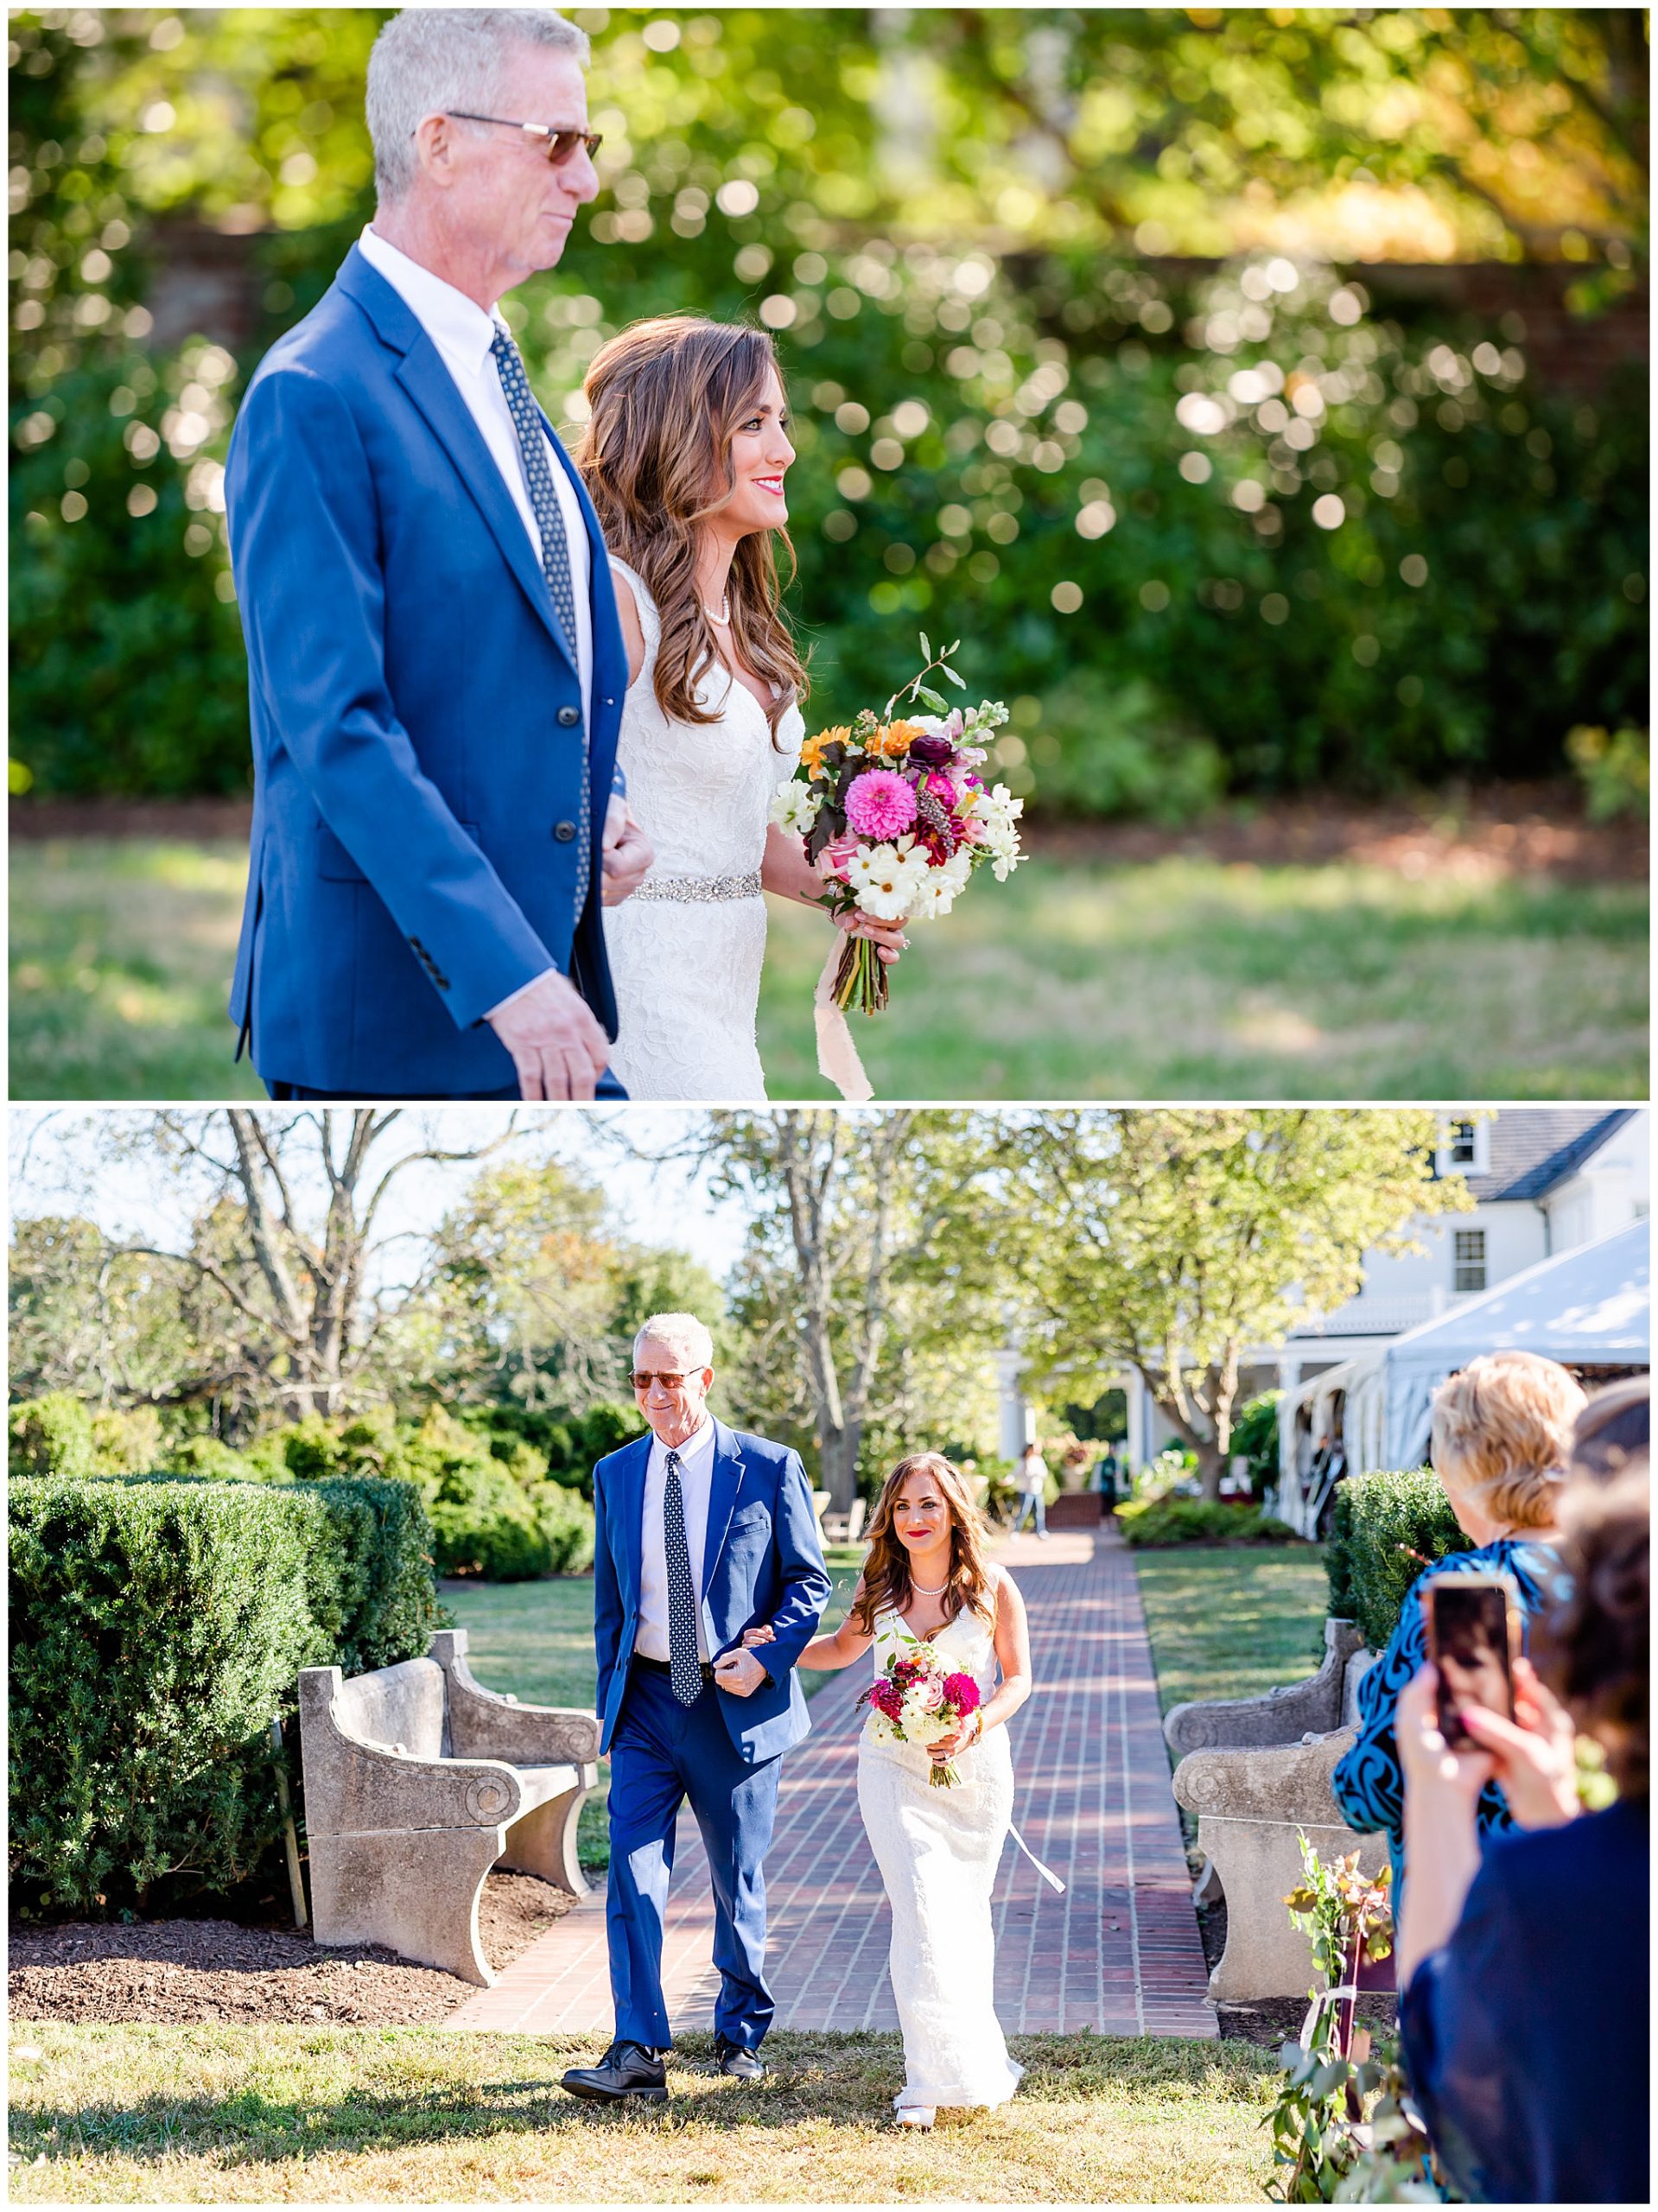 early autumn River Farm wedding, Alexandria Virginia wedding, Alexandria wedding venues, Alexandria Virginia photographer, Alexandria wedding photographer, DC wedding photographer, DC wedding venues, DC wedding photography, waterfront wedding venue, DC autumn wedding, DC natural light wedding photographer, DC natural light wedding photographer, Rachel E.H. Photography, father walking daughter down aisle, man in blue suit, father with sunglasses